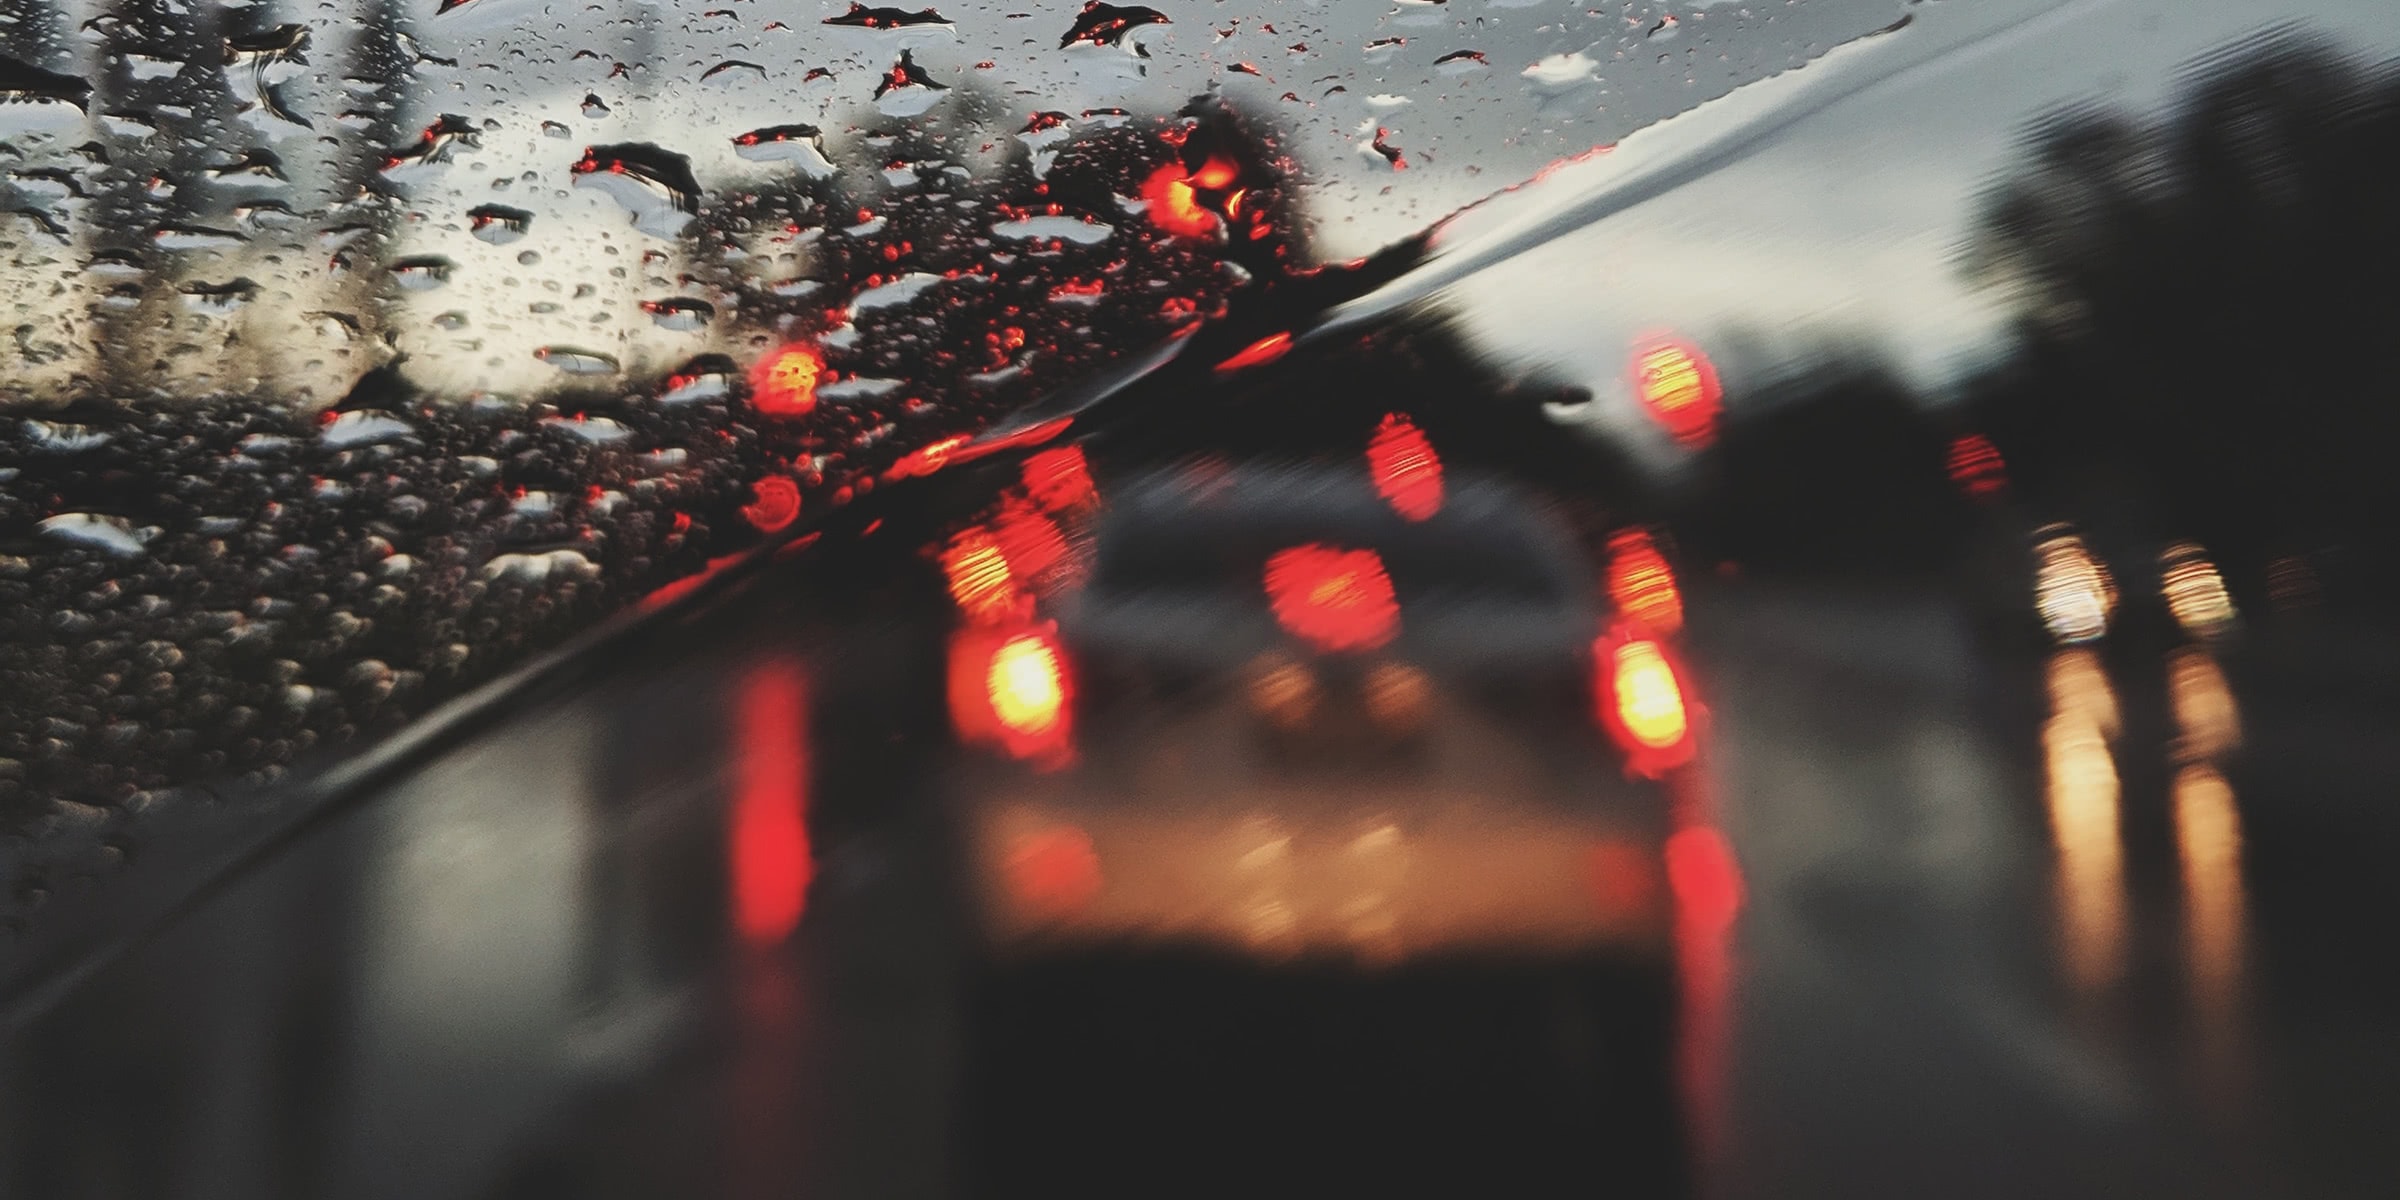 Driving in drizzle: 12 tips for navigating safely in the rain (Rule 1: slow down!)